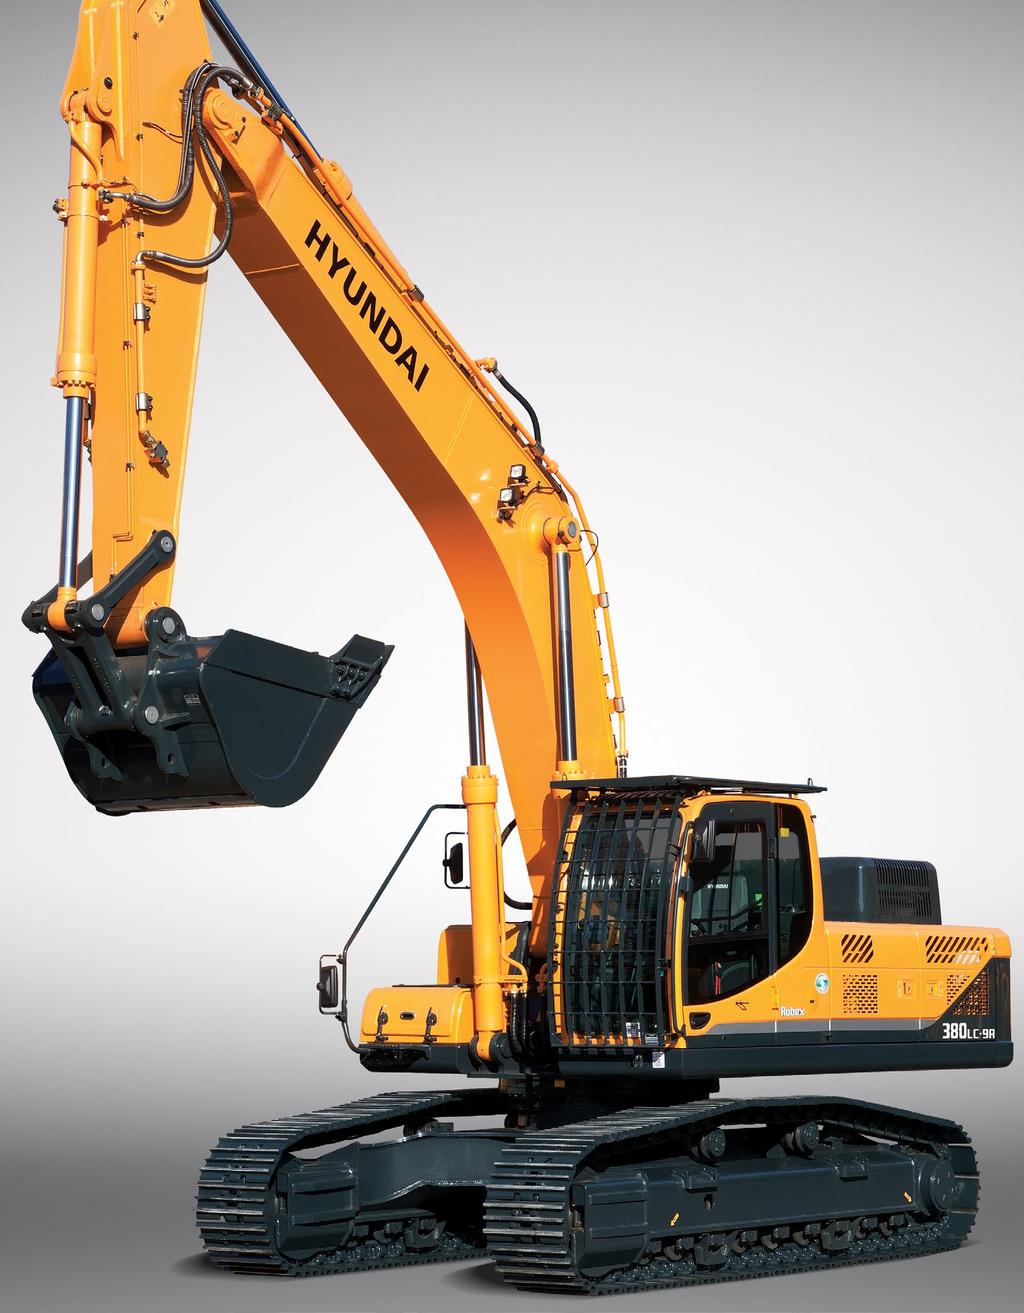 Performance 9A series is designed for maximum performance to keep the operator working